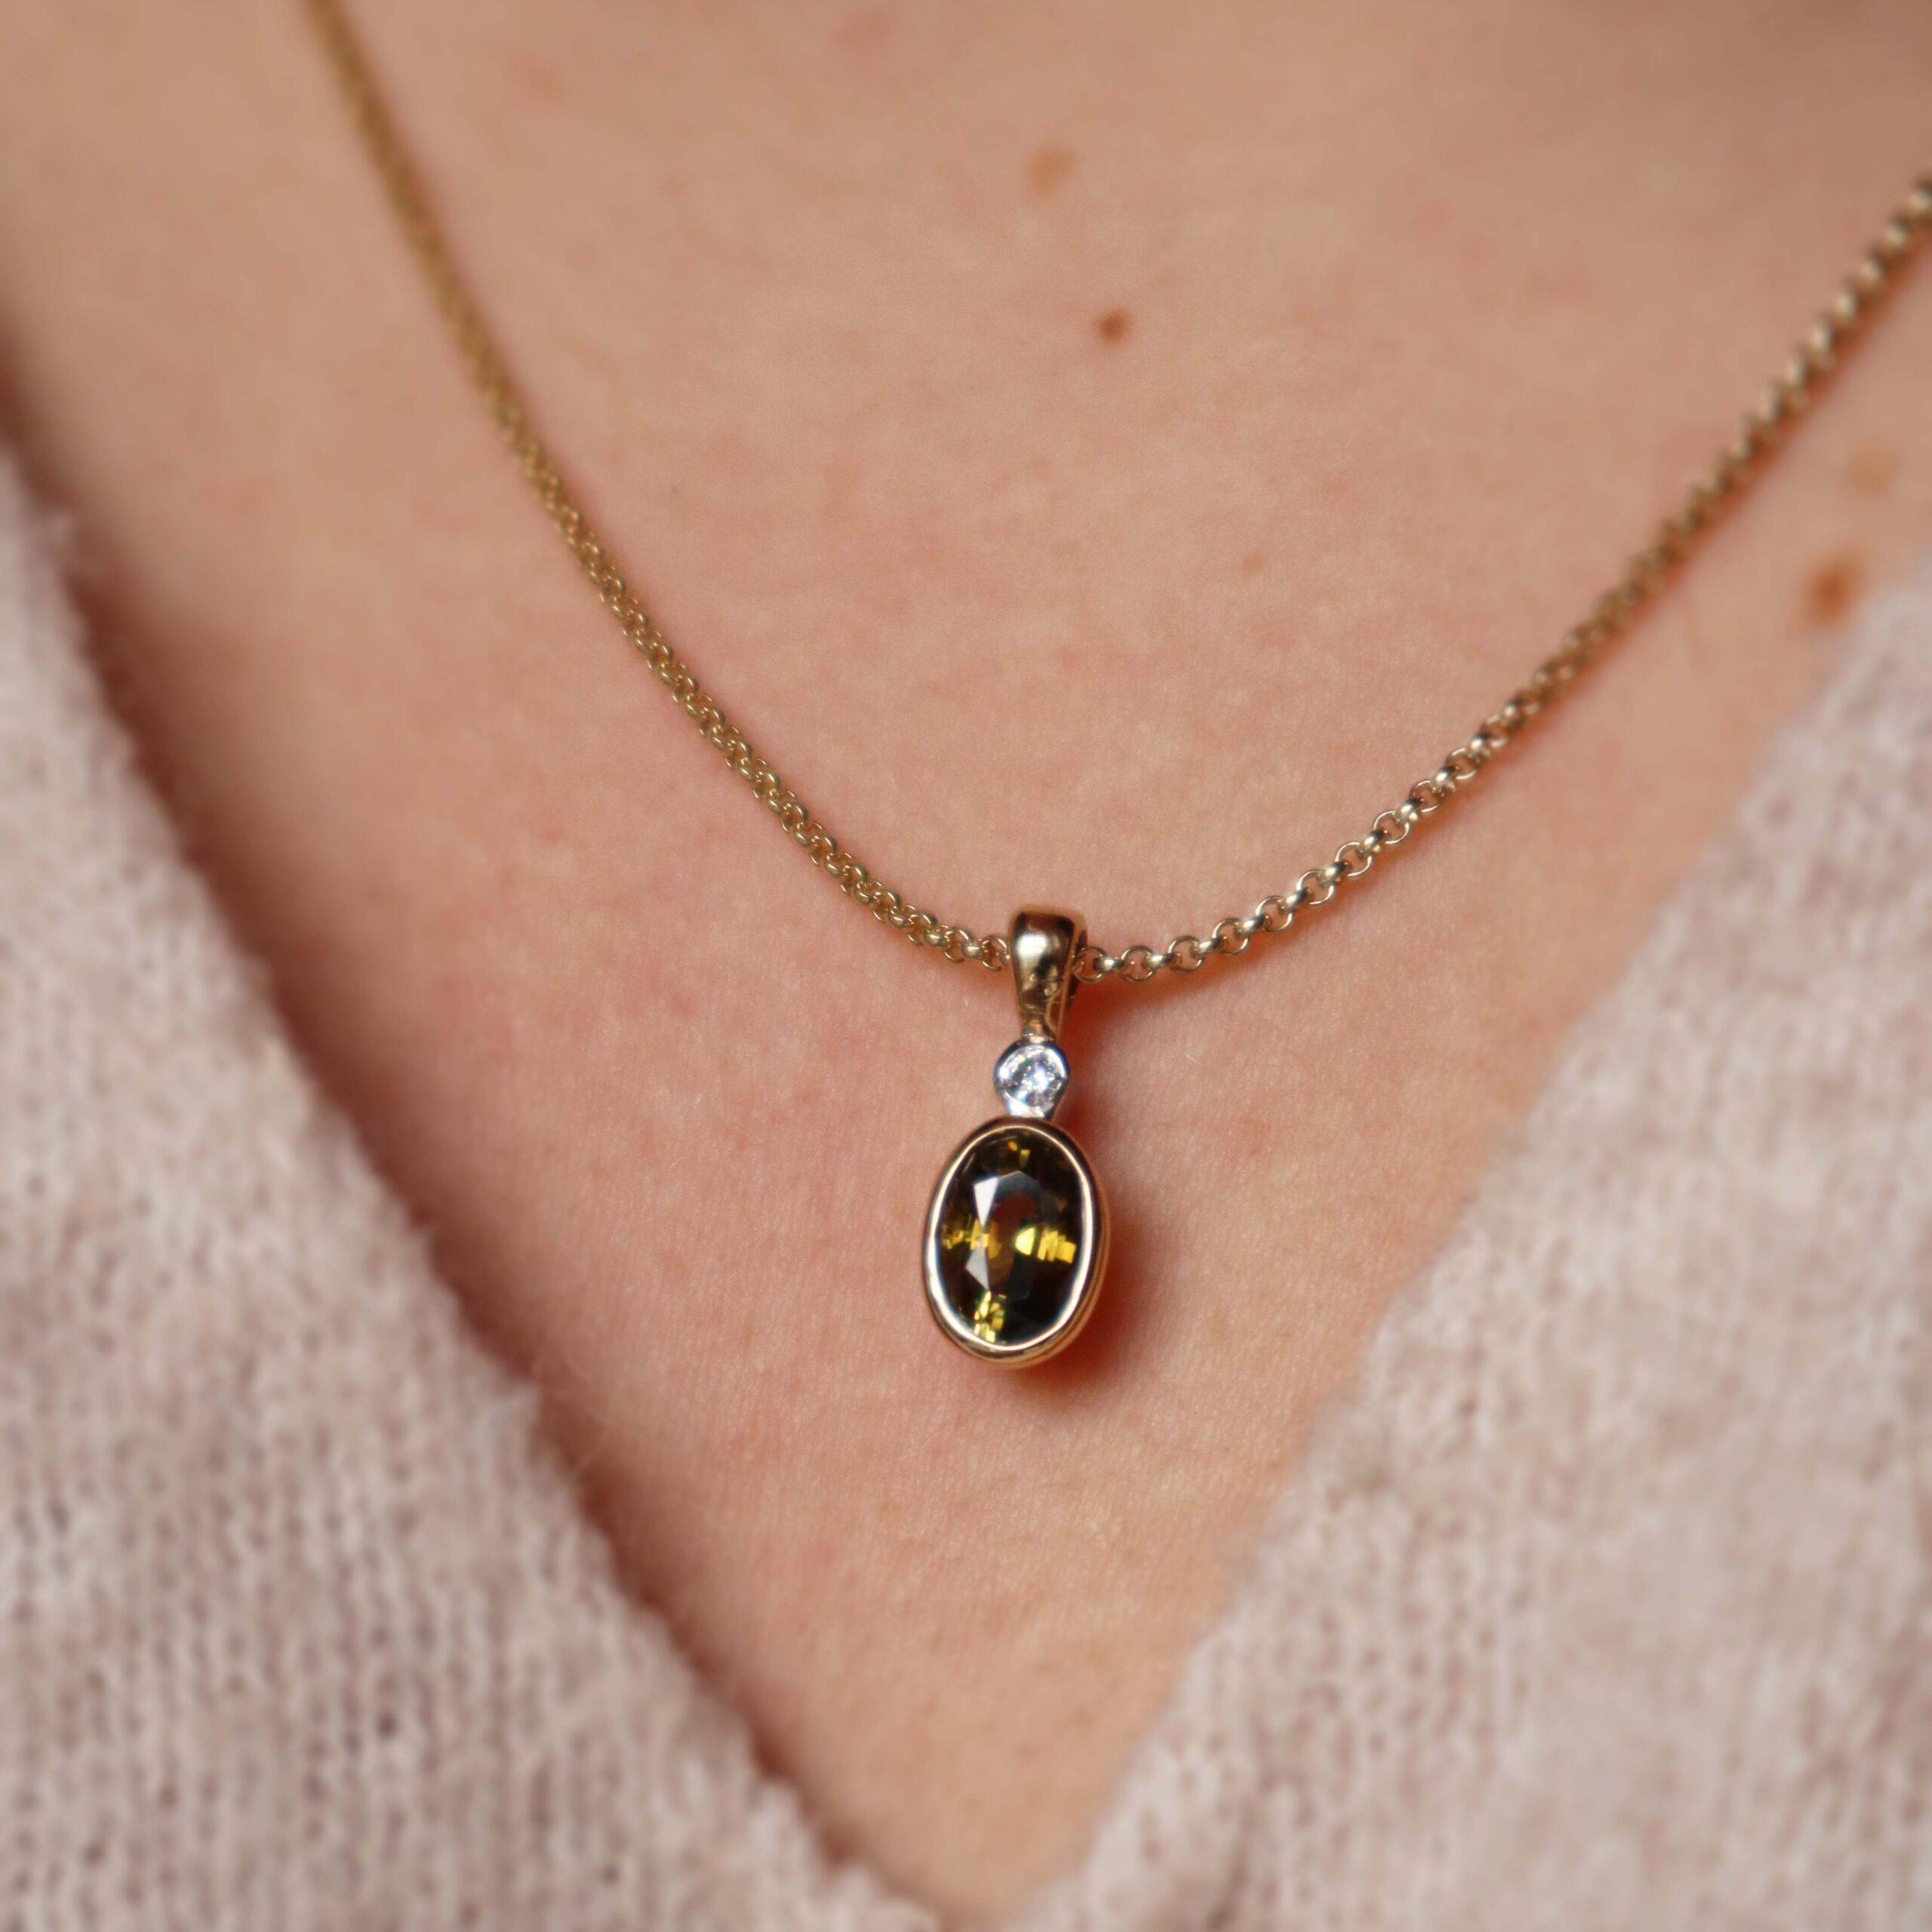 Chrysoberyl and diamond necklace in gold